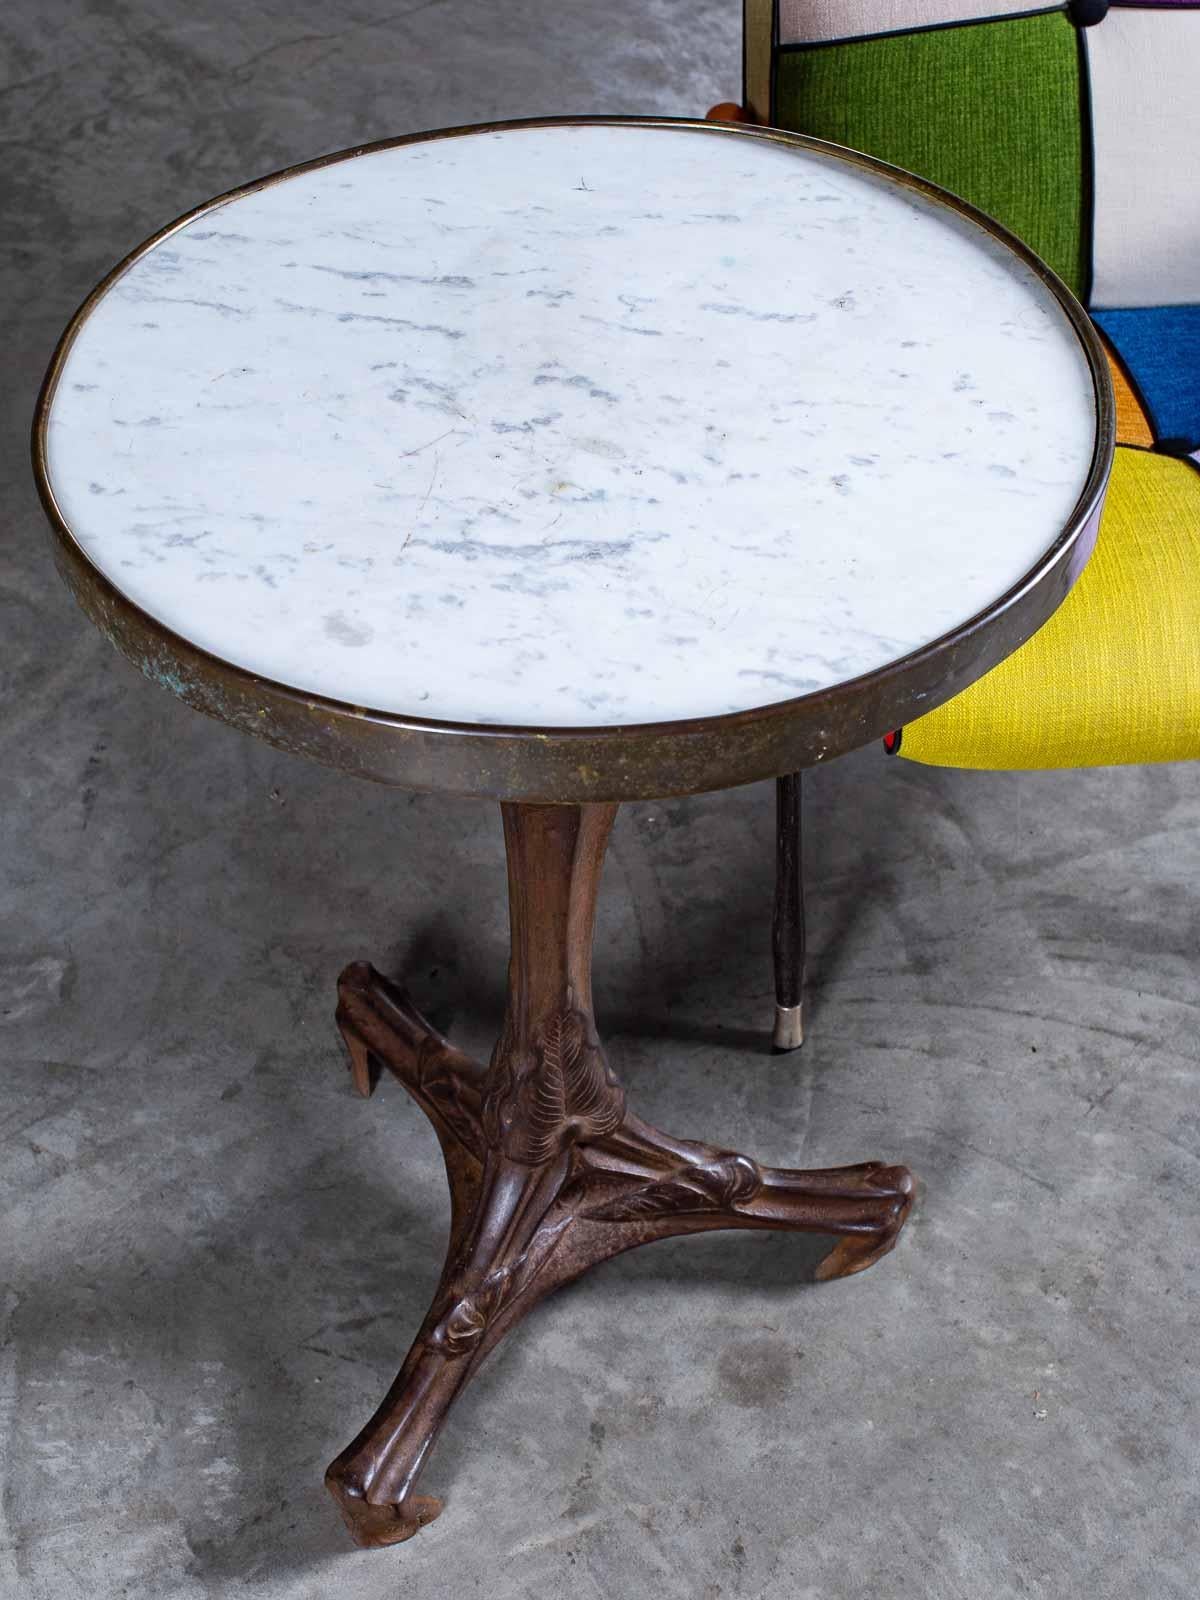 This handsome vintage French Art Nouveau bistro table circa 1920 has an iron base and a marble top enclosed by a band of brass. The sensuous and seductive lines developed during the Art Nouveau period (1890-1914) are fully on display here with the